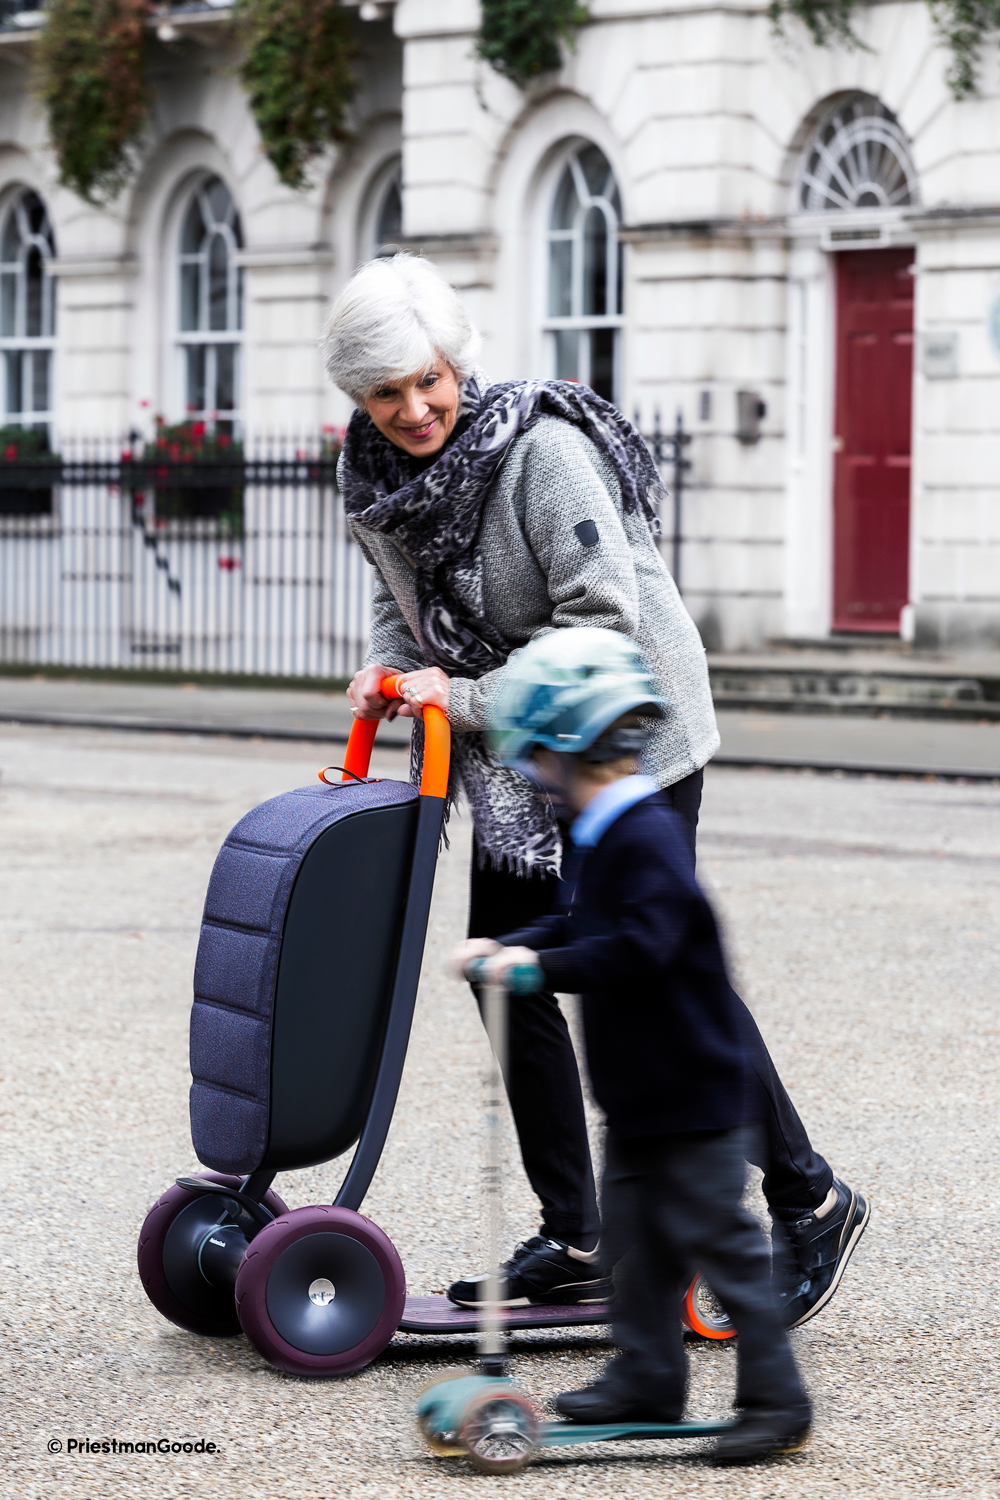 An older woman rides her Scooter for Life alongside her young grandson, who is riding a child’s scooter.